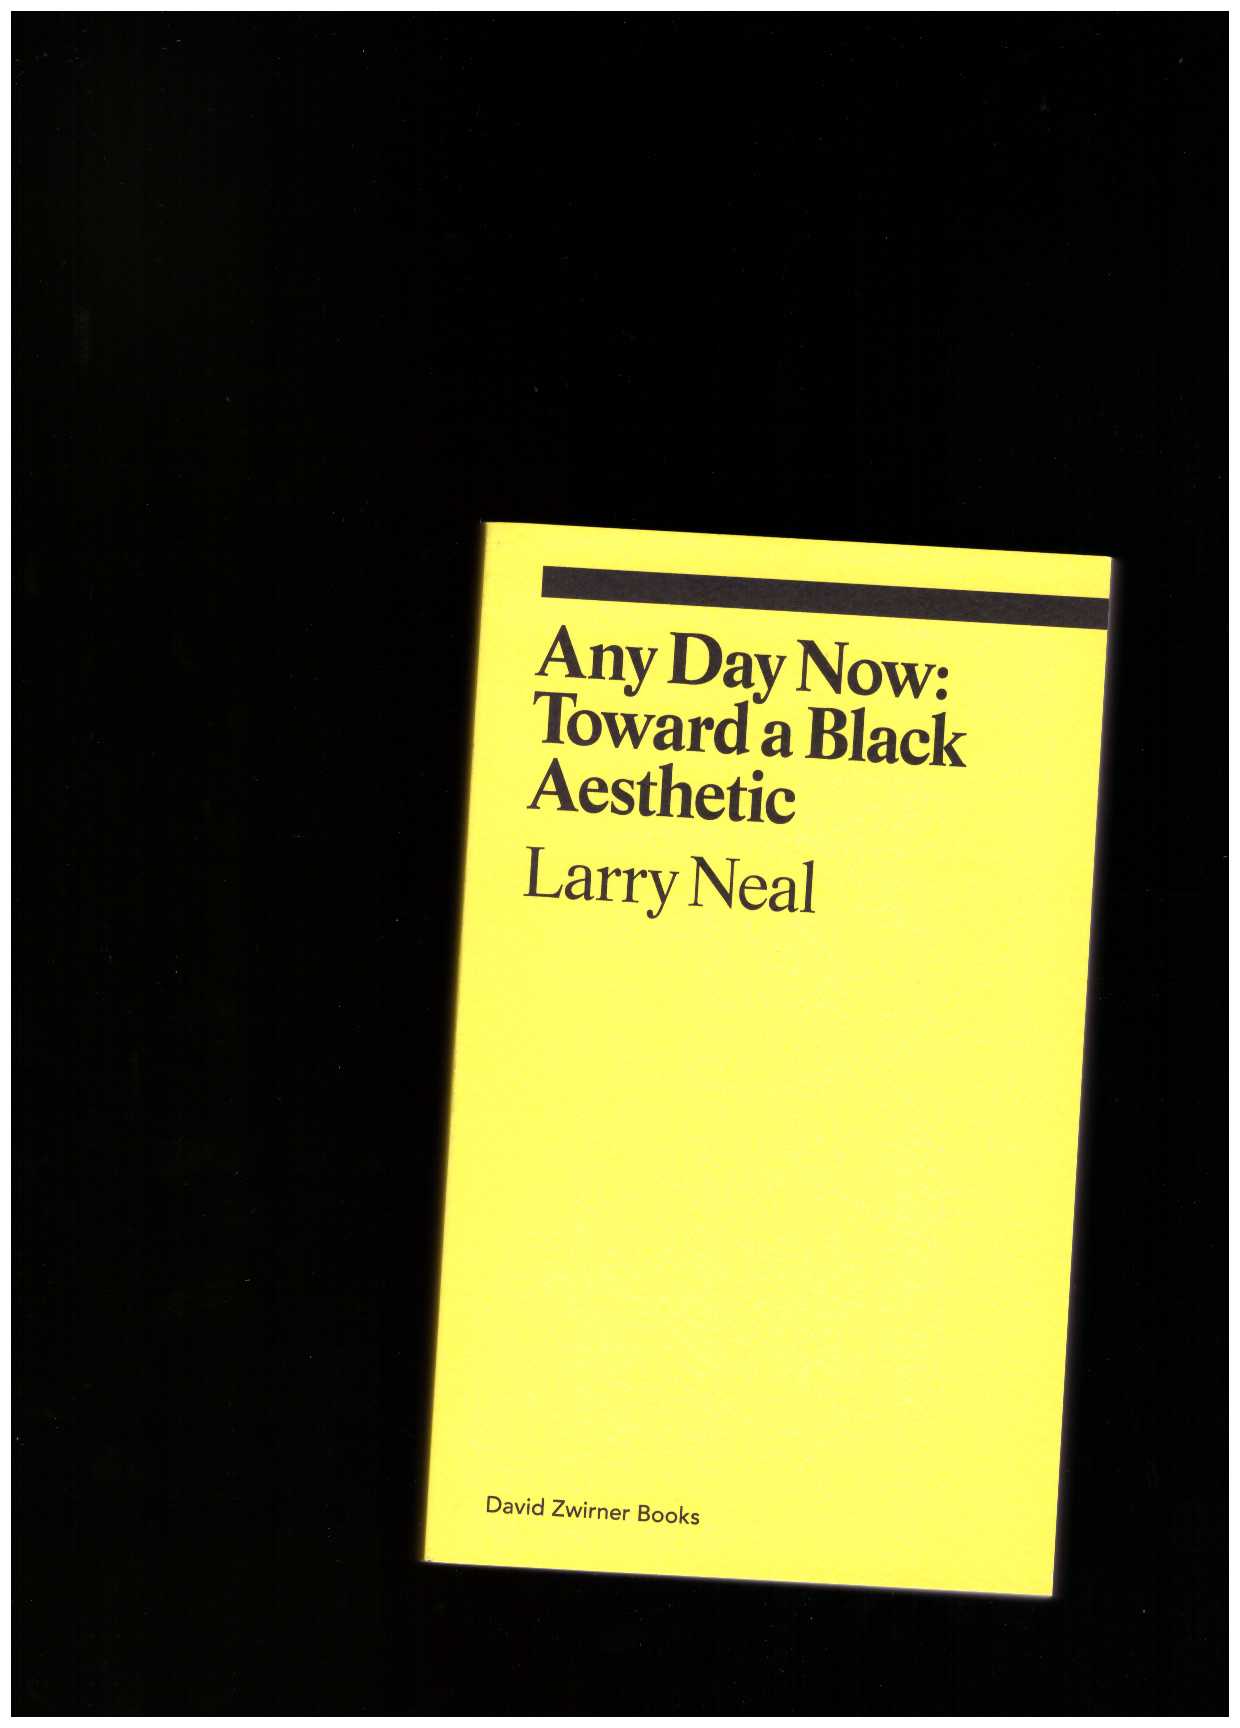 NEAL, Larry; BISWAS, Allie (ed.) - Any Day Now: Toward a Black Aesthetic